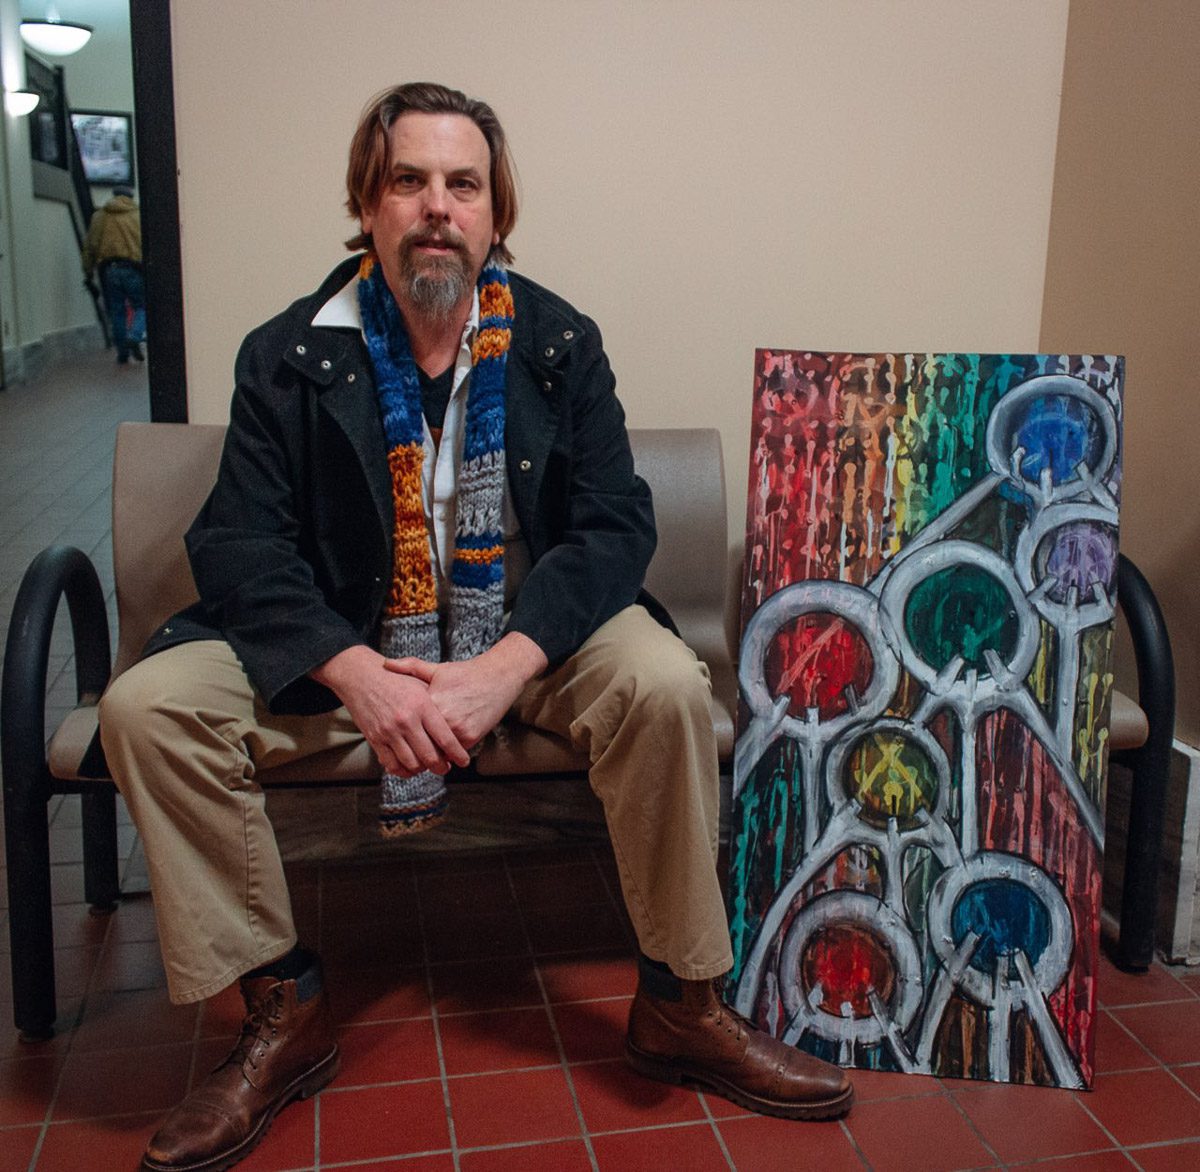 Photo of Walter Ricci-Wadas with his painting "We Are One" at Union Station in Utica, NY. Photo by Alexander Ackerman.